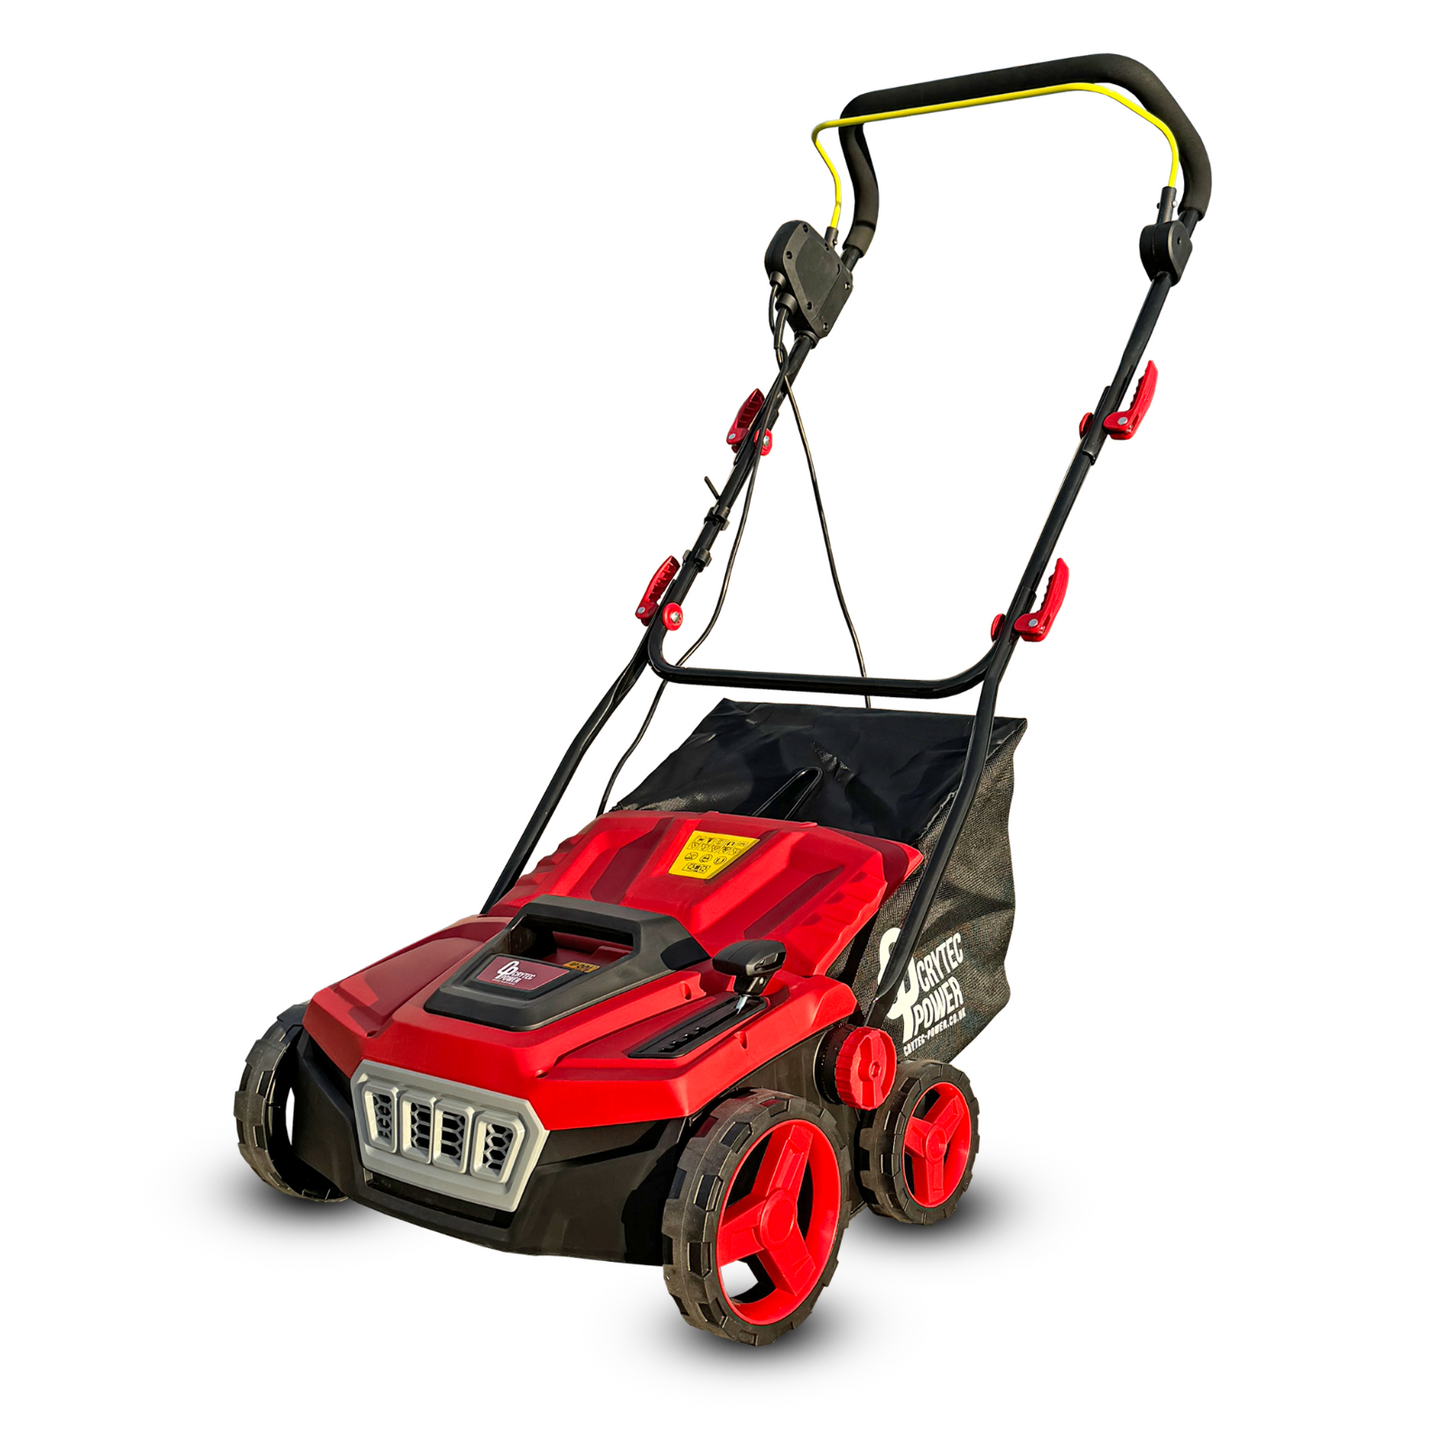 Crytec CRGB-E 1800W | Artificial Grass Brush | Electric | Lawn Sweeper